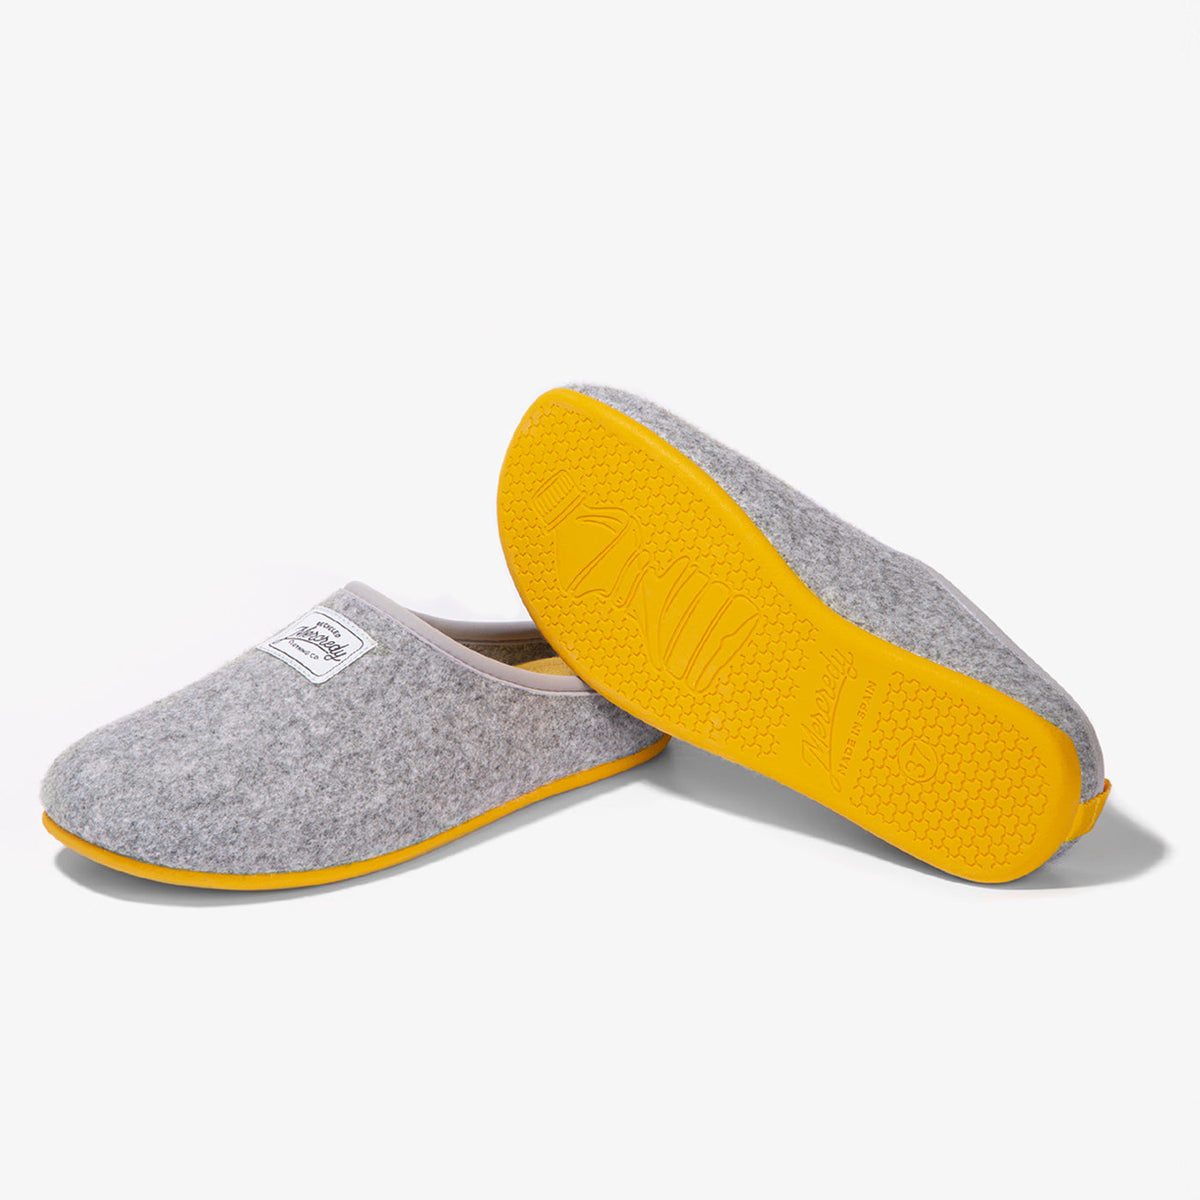 Mercredy Slippers - Ladies - Grey with Yellow Sole